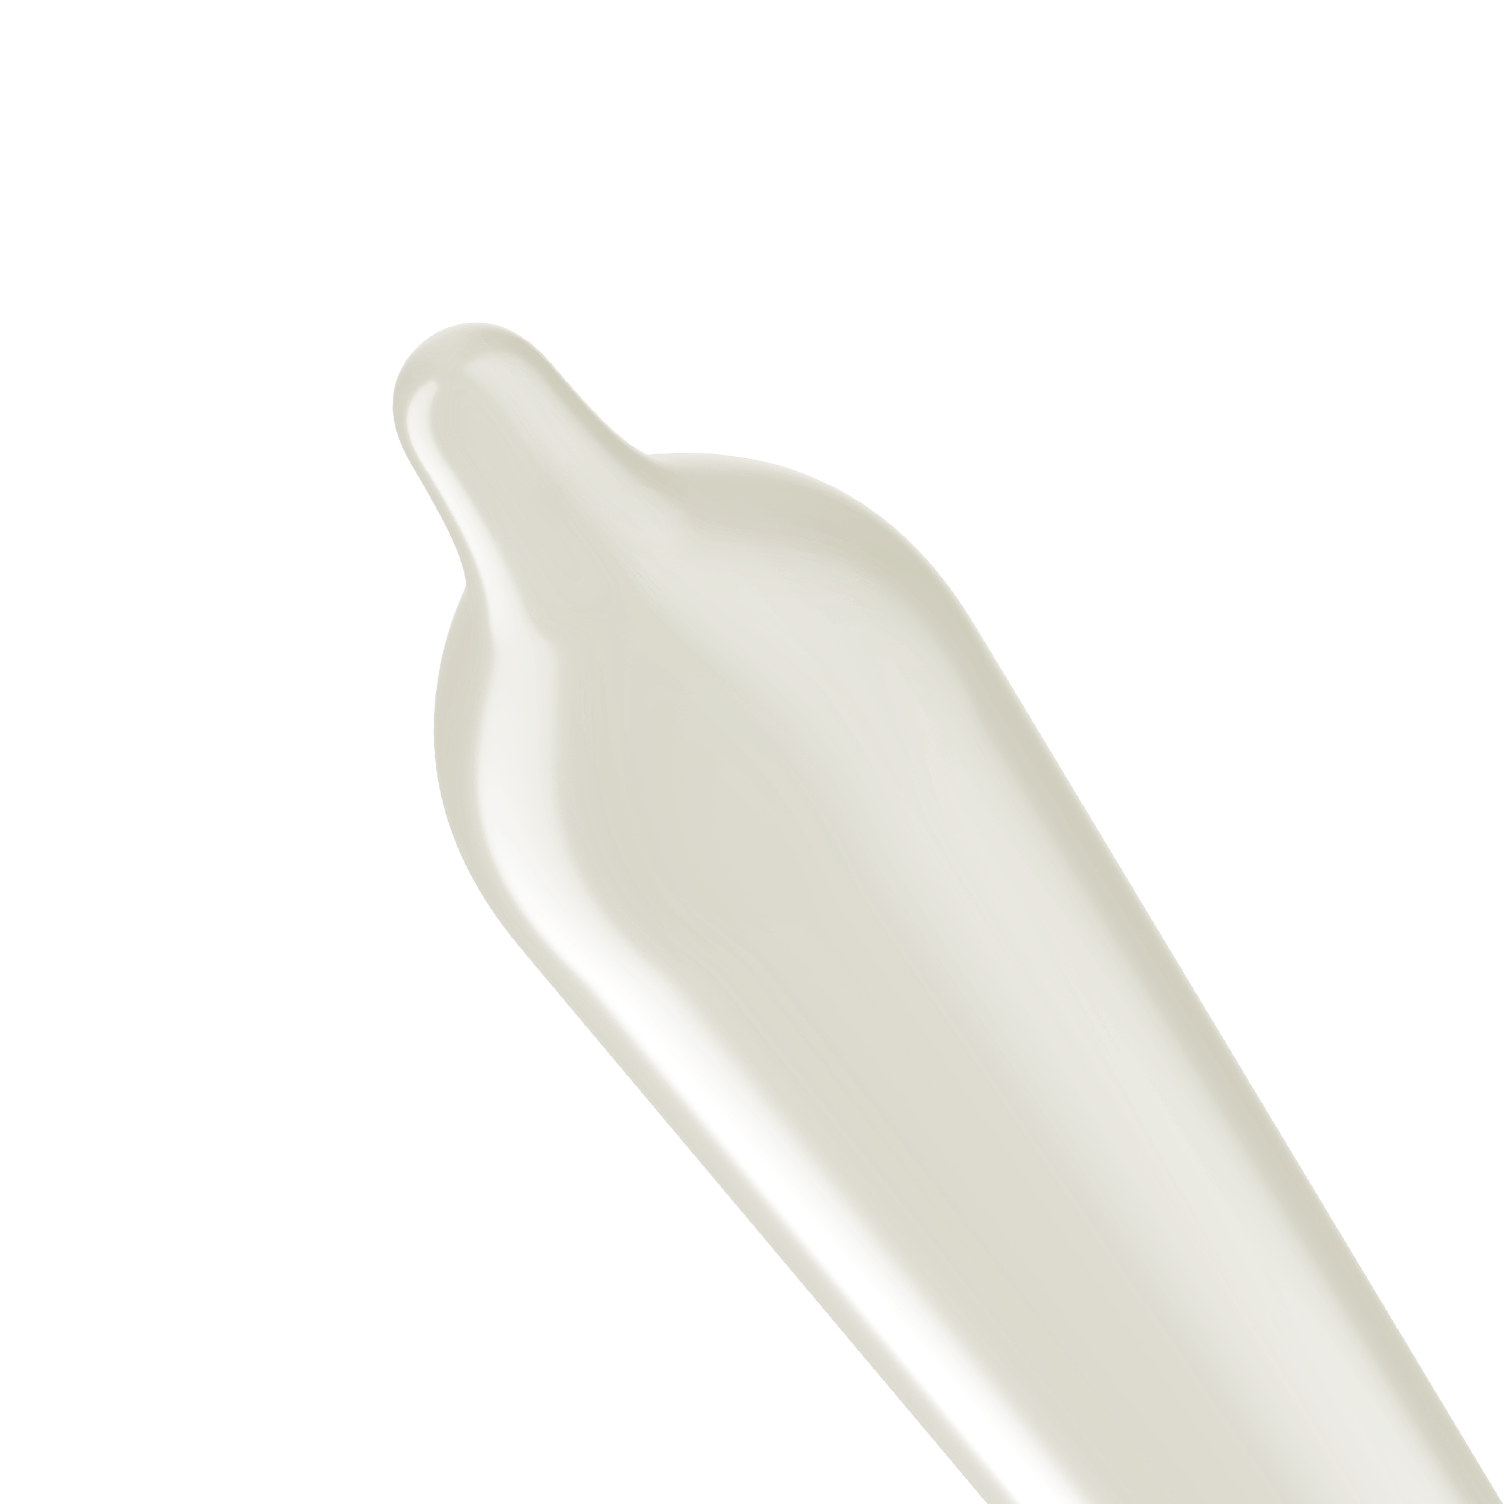 Trojan Ultra Thin straight shaped condom with reservoir tip.